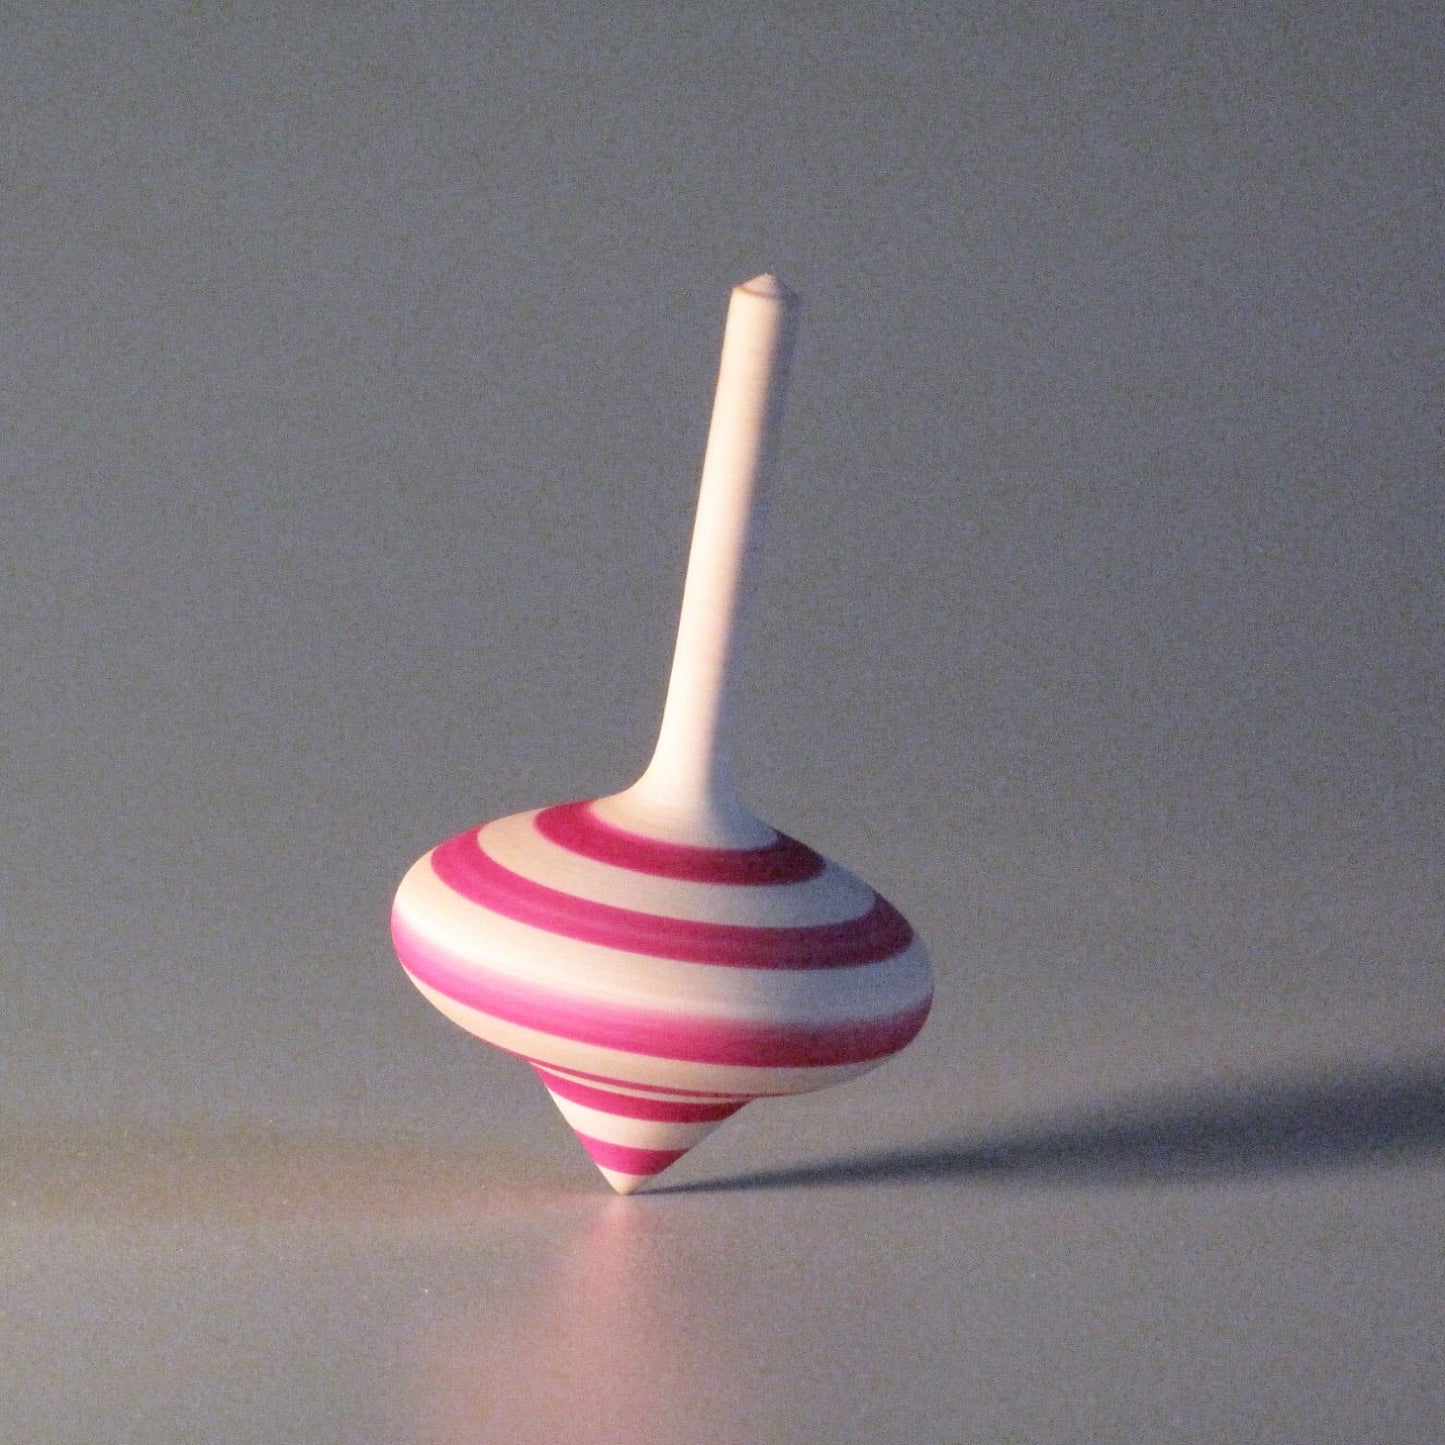 Toy spinning top with pink stripes